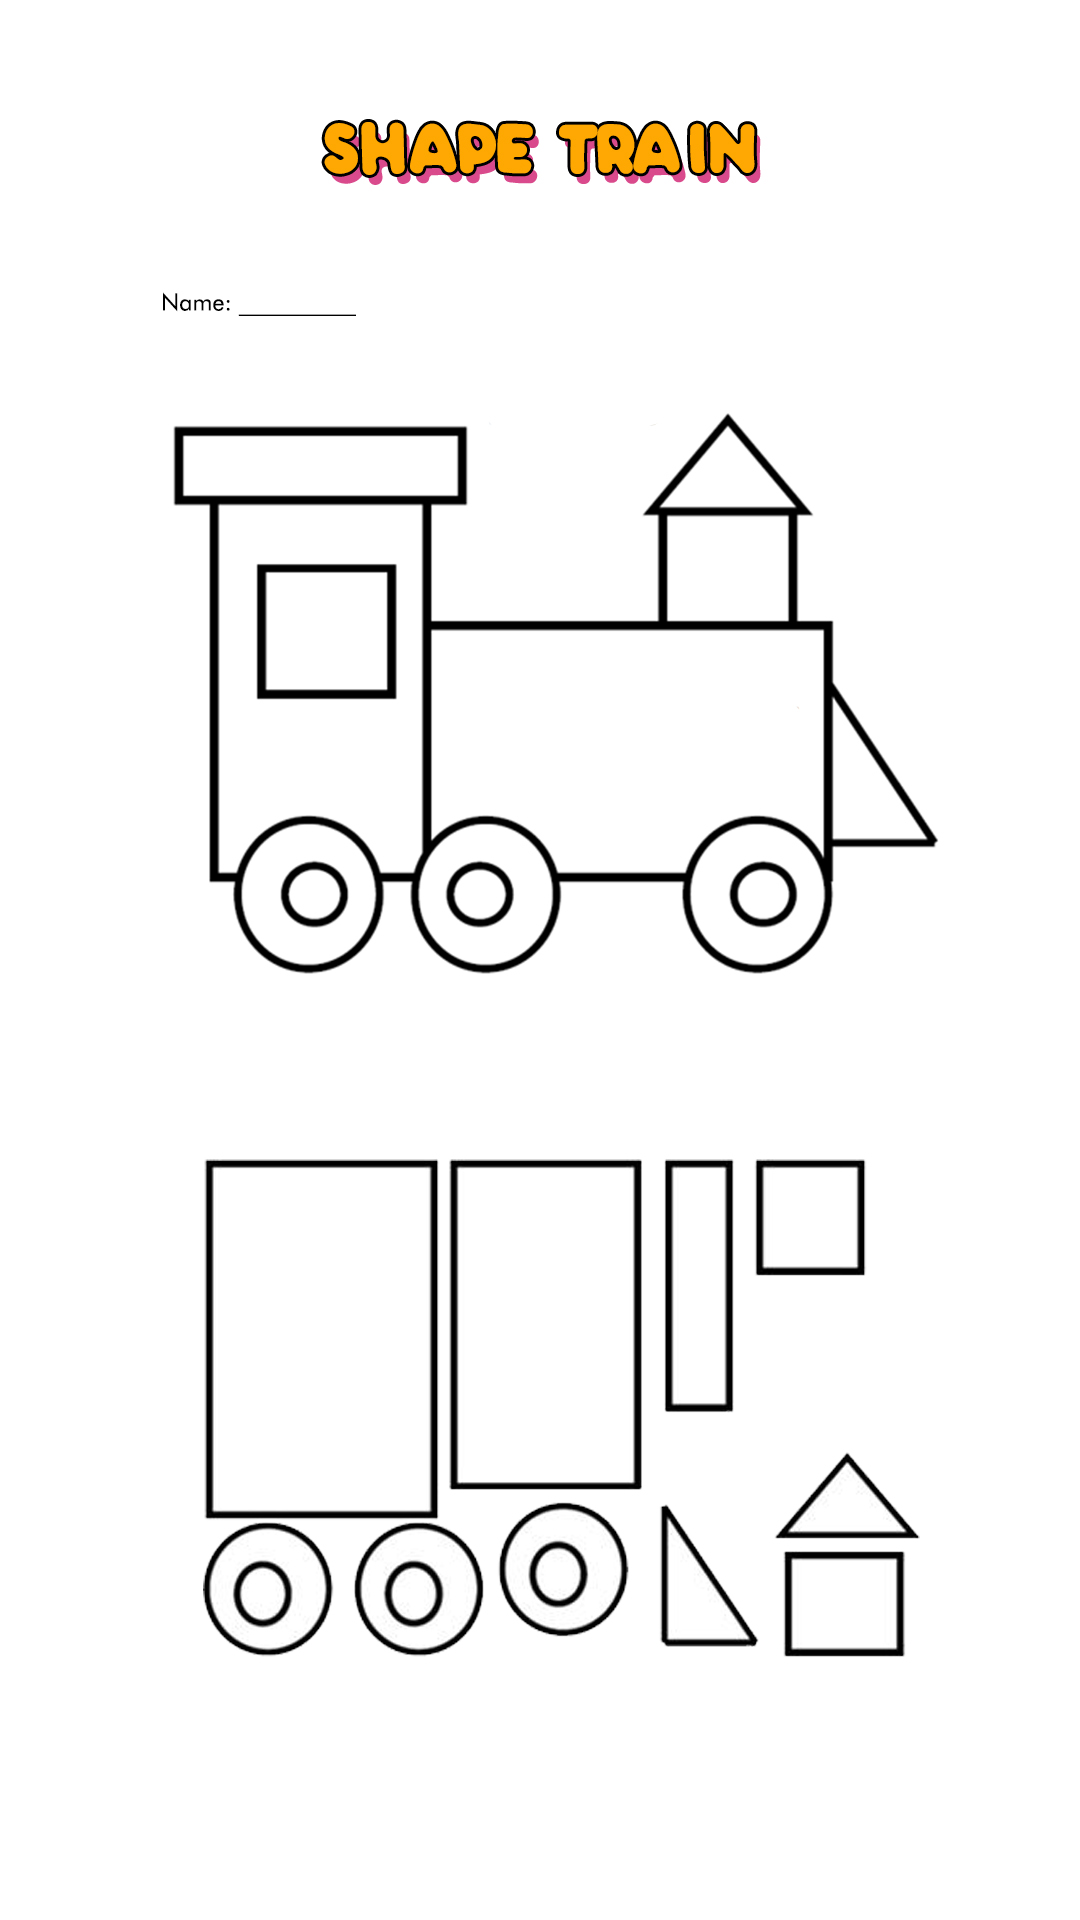 Train Shapes to Cut Out